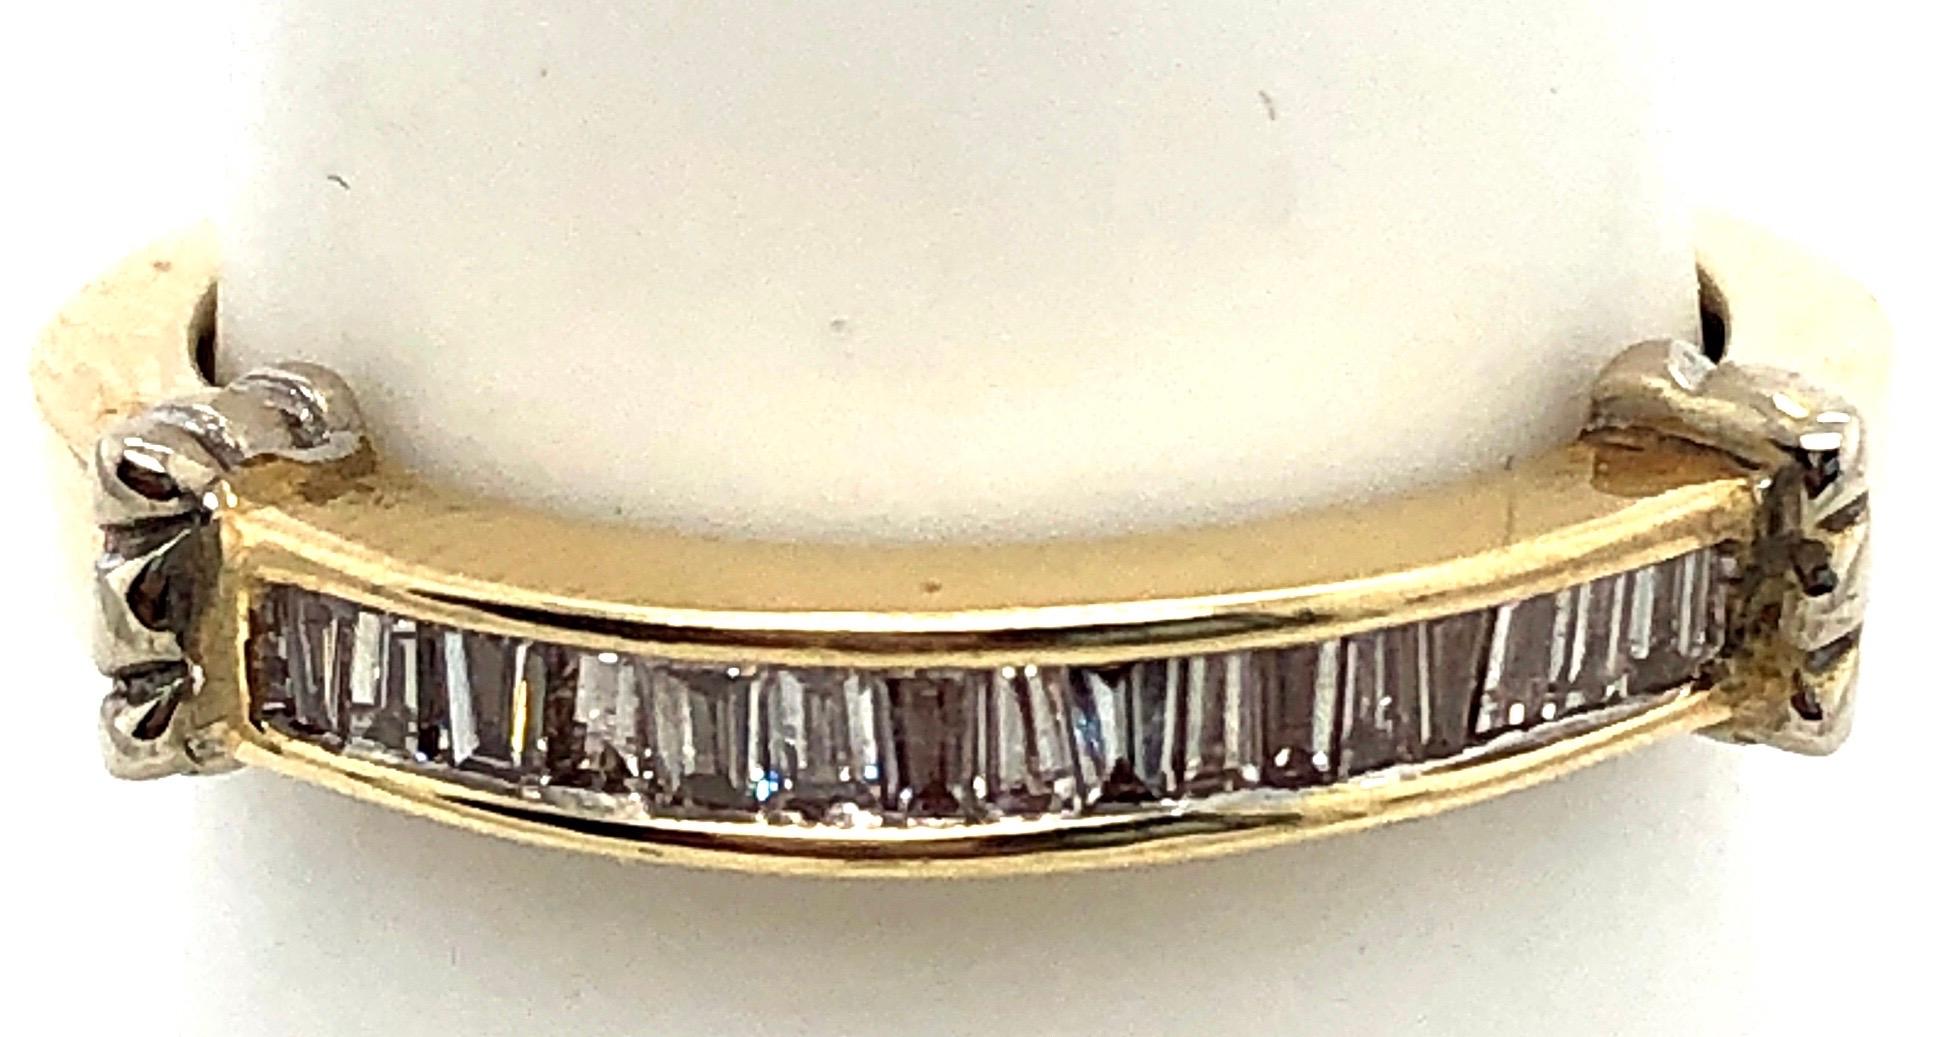 14 Karat Yellow and White Gold Bridal Band Ring with Baguette Diamonds In Good Condition For Sale In Stamford, CT